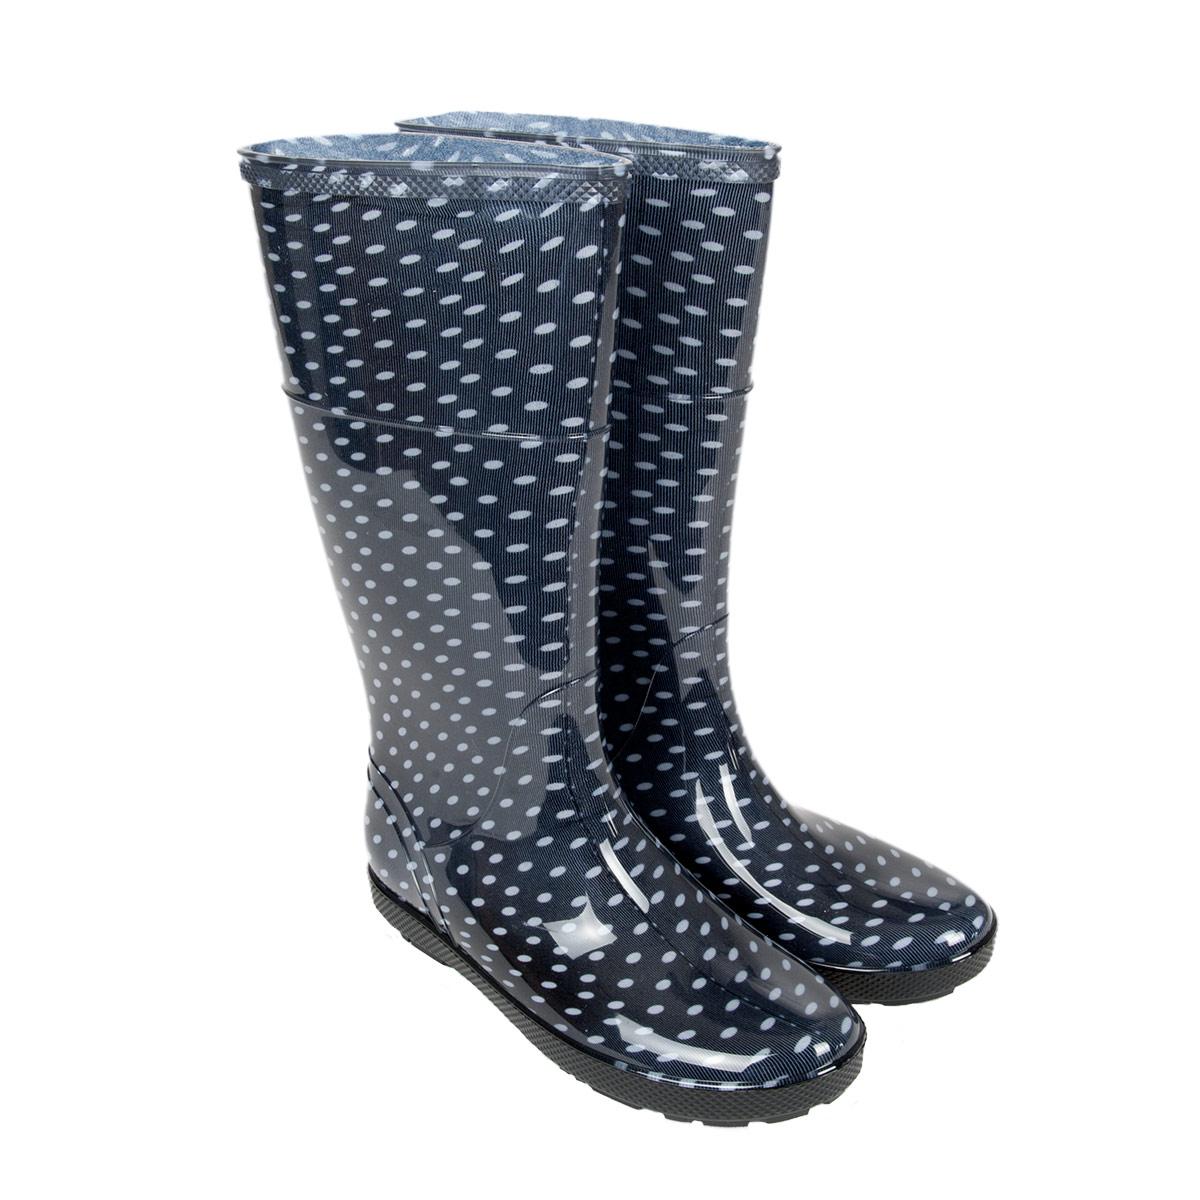 slip on rubber boots